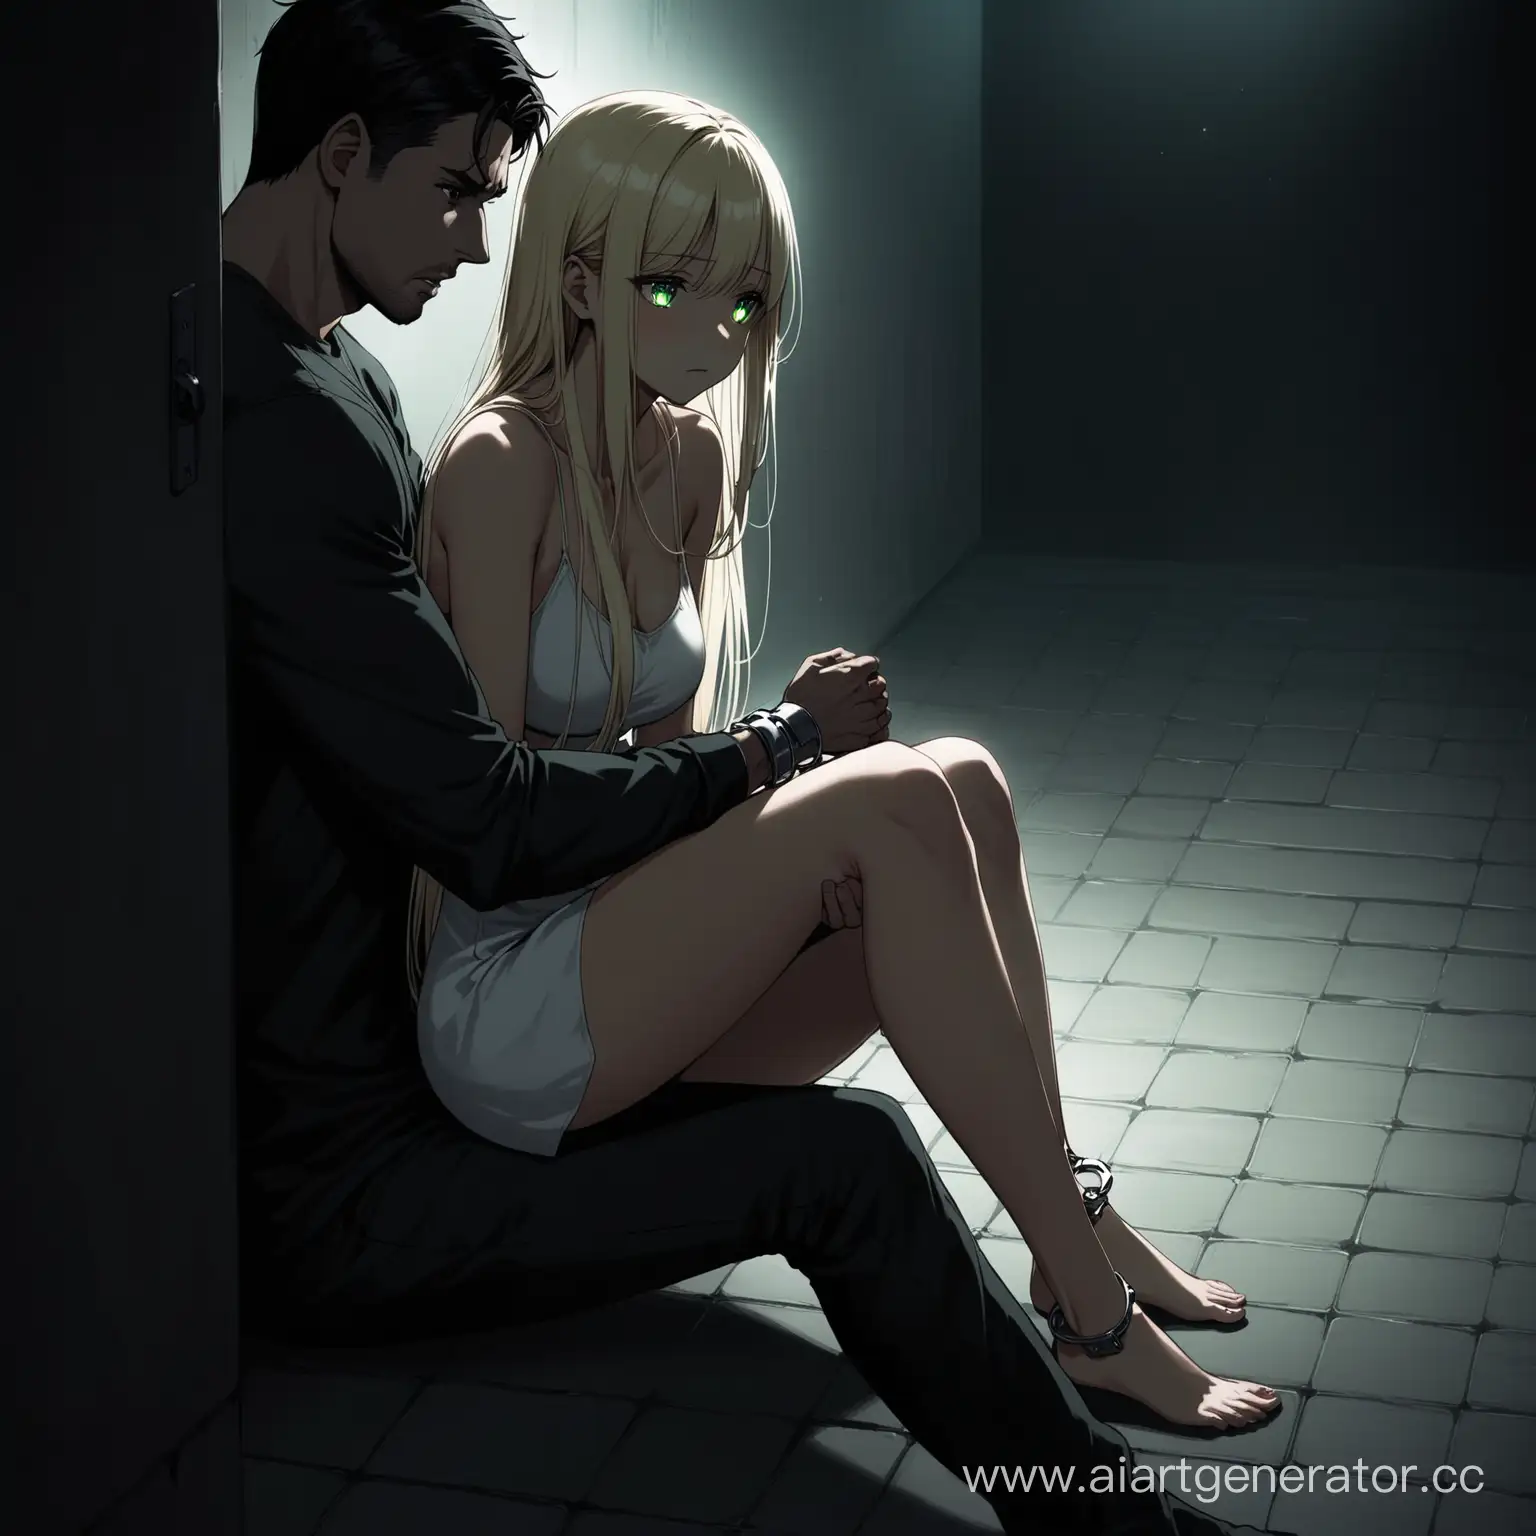  Low girl, a thin body, long blonde straight hair, green eyes, she is wearing a semi-transparent short dress, she is sitting on the basement floor in handcuffs, a very tall and fit guy, with white hair and black eyes is standing next to her and he is looking at her, He touches her thigh with his big hand, dark atmosphere, girl looks scared